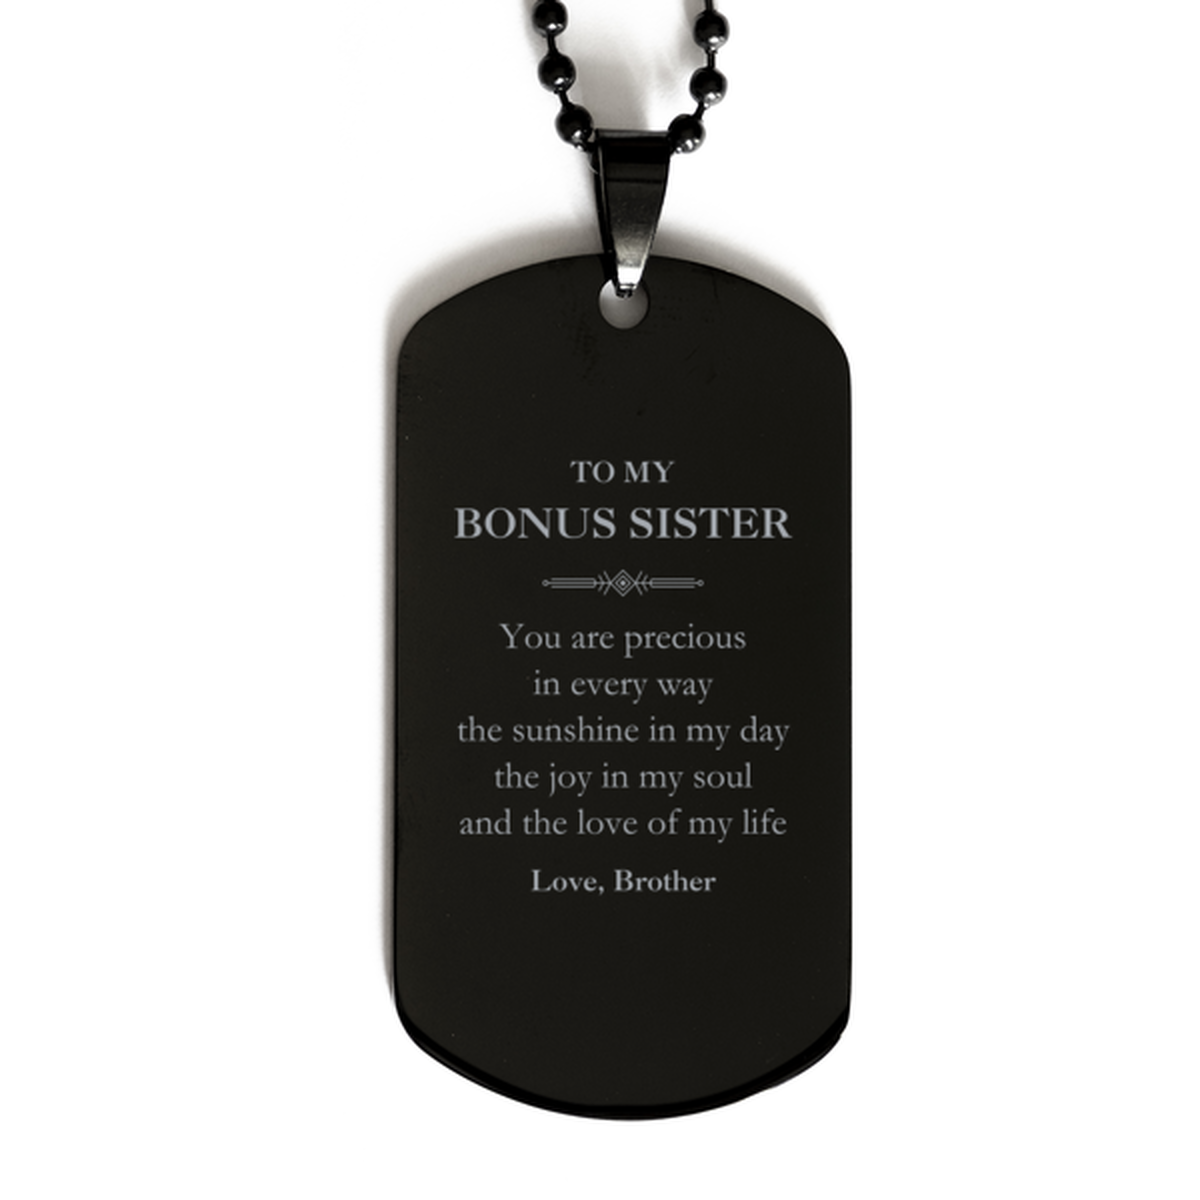 Graduation Gifts for Bonus Sister Black Dog Tag Present from Brother, Christmas Bonus Sister Birthday Gifts Bonus Sister You are precious in every way the sunshine in my day. Love, Brother